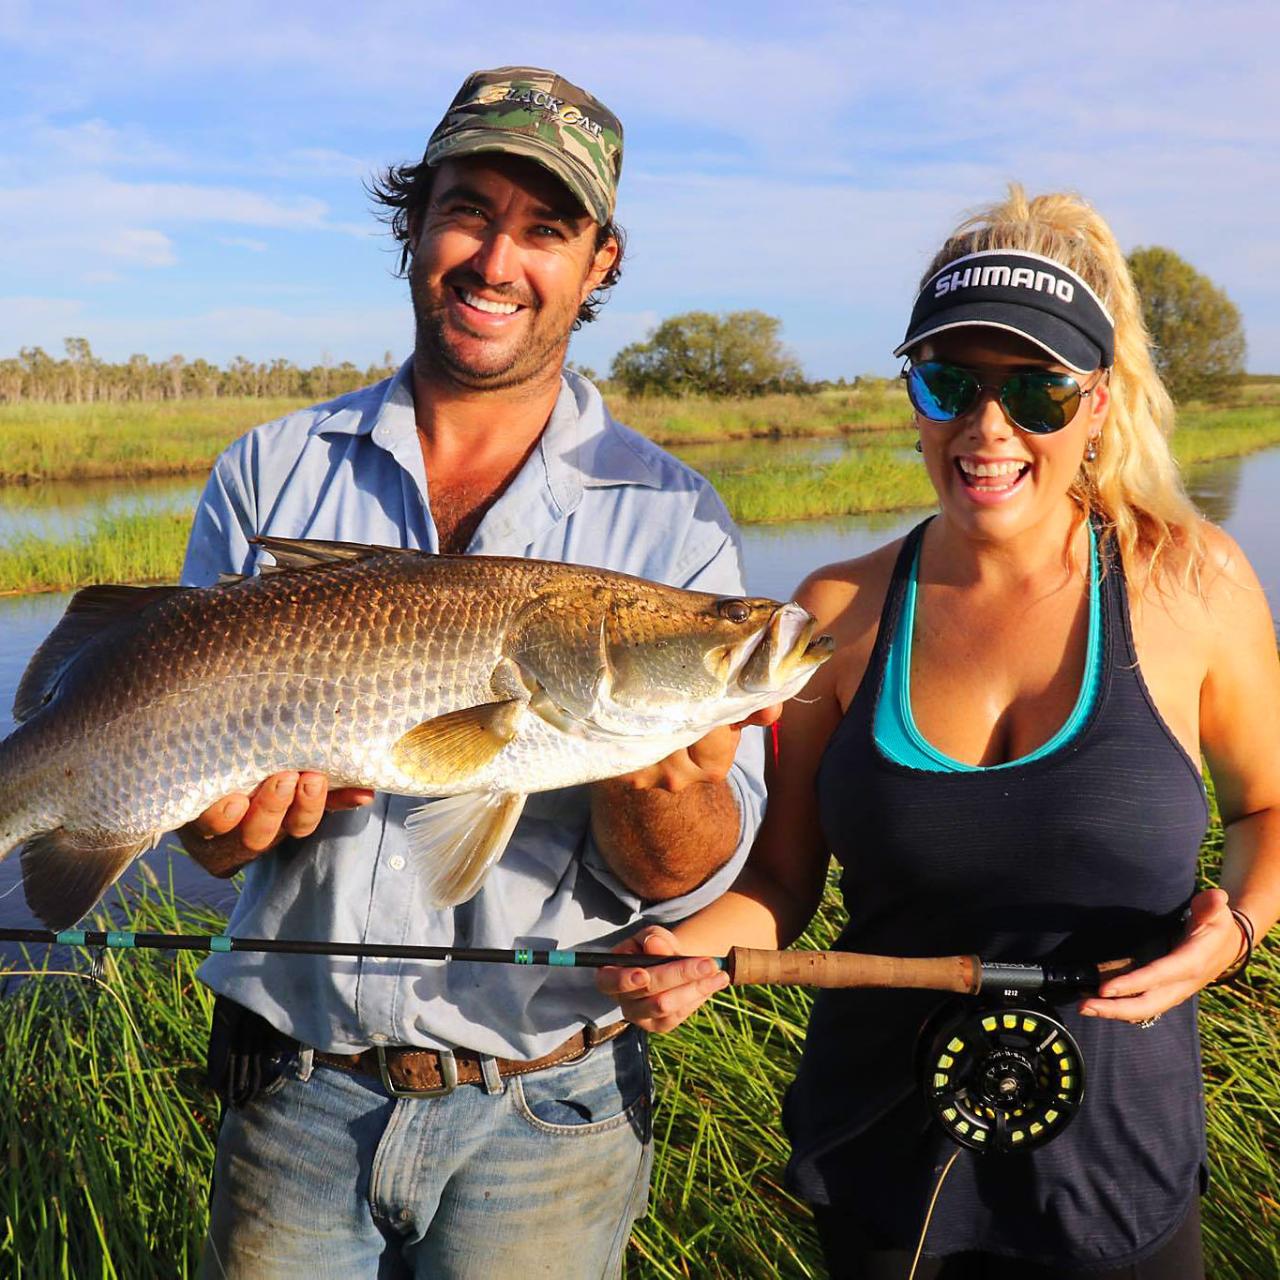 Full Day Heli Fishing and Airboat Adventure